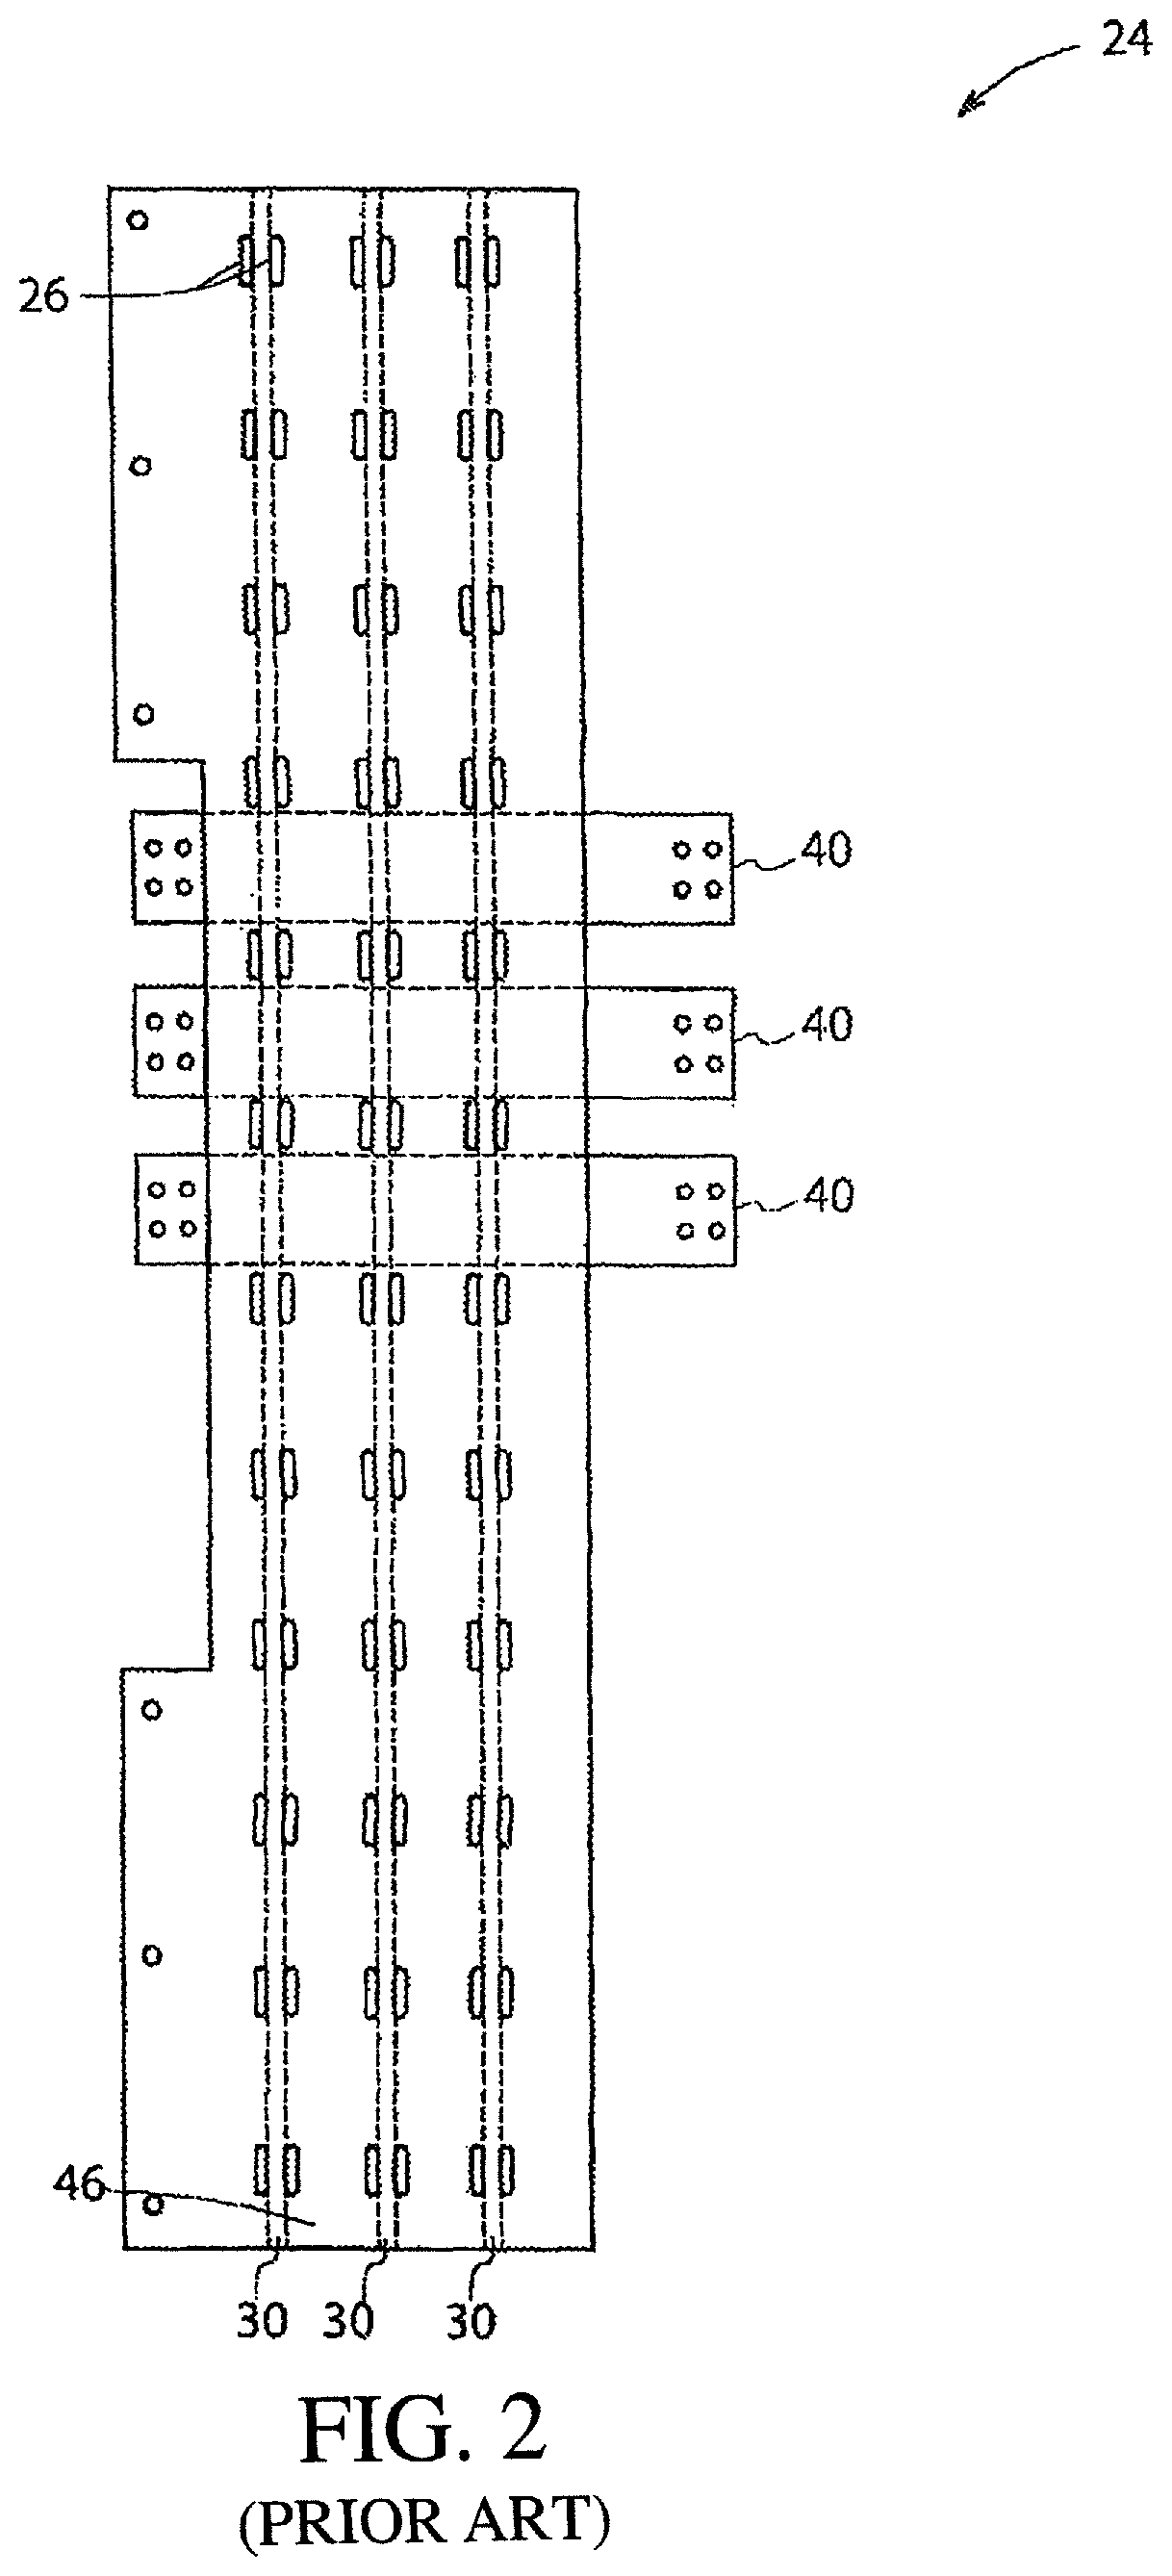 System for isolating power conductors using slidable insulating sheets